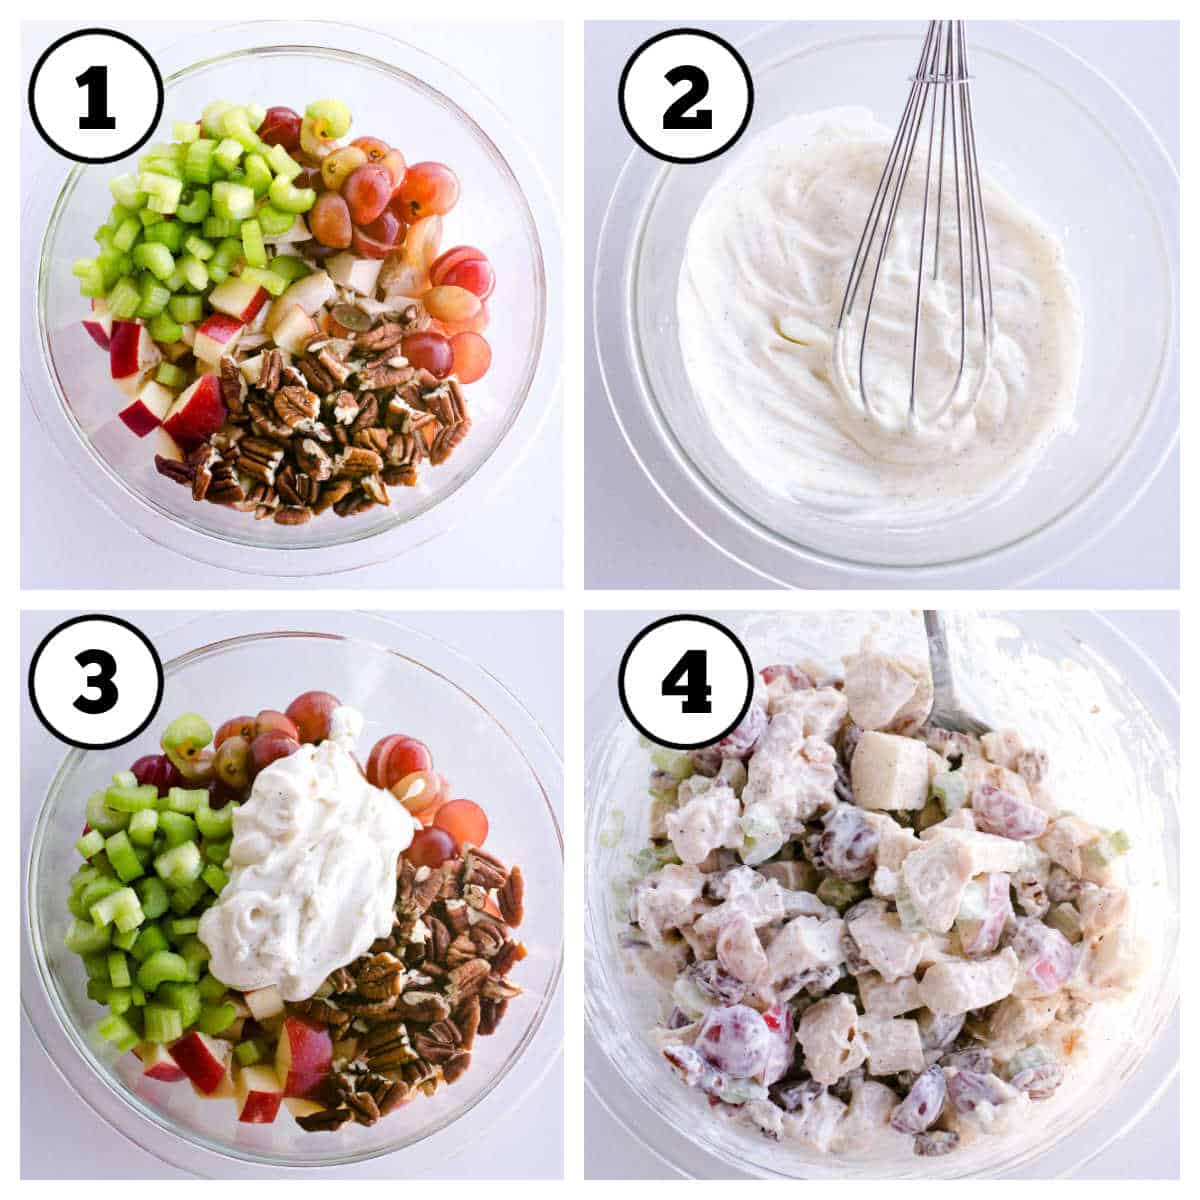 Steps 1-4 of how to make chicken salad with grapes and apples.